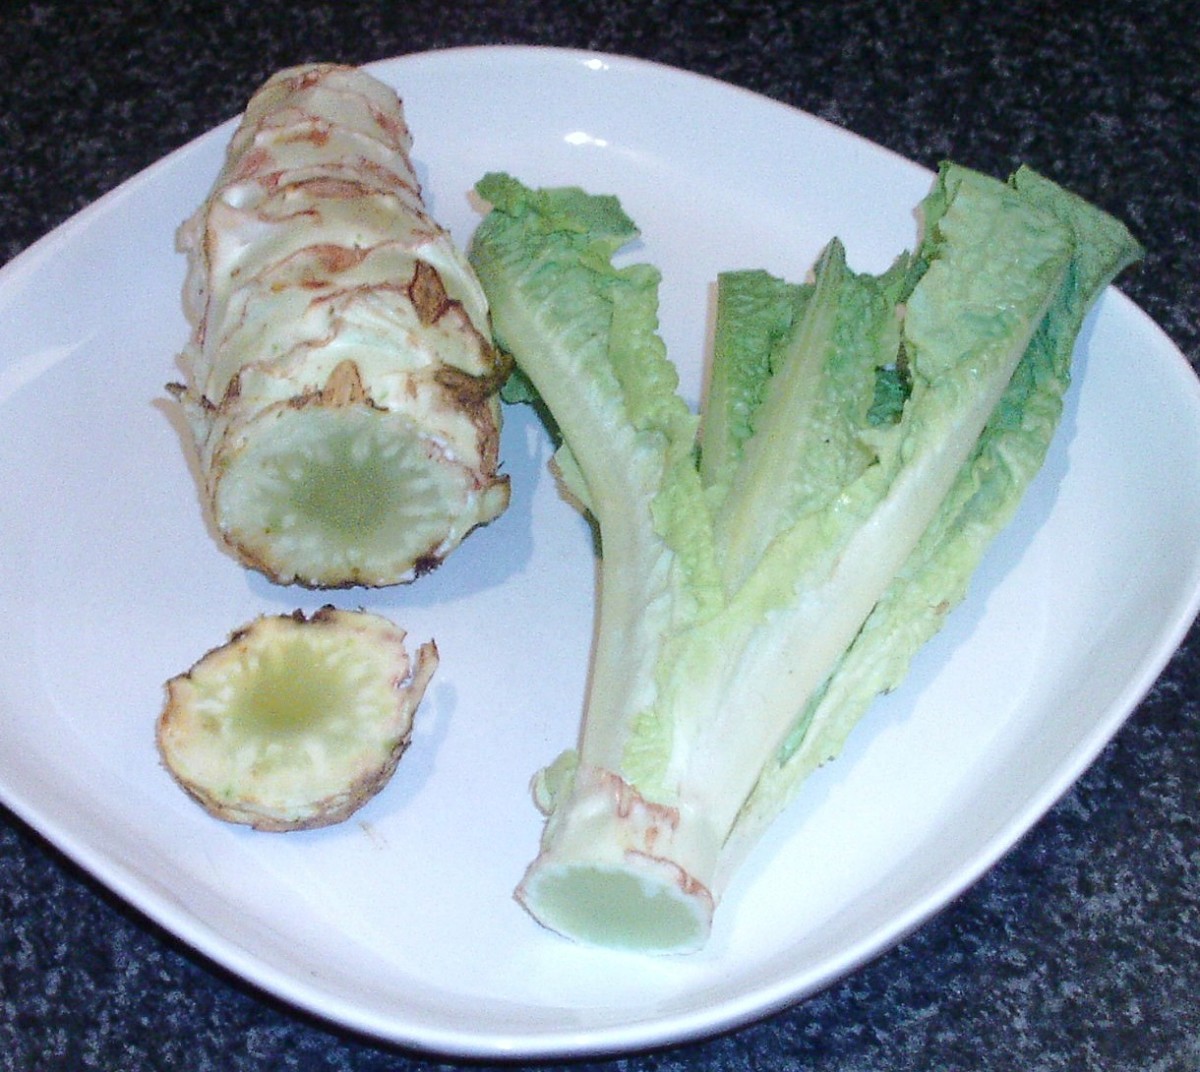 Separated celtuce stem and leaves